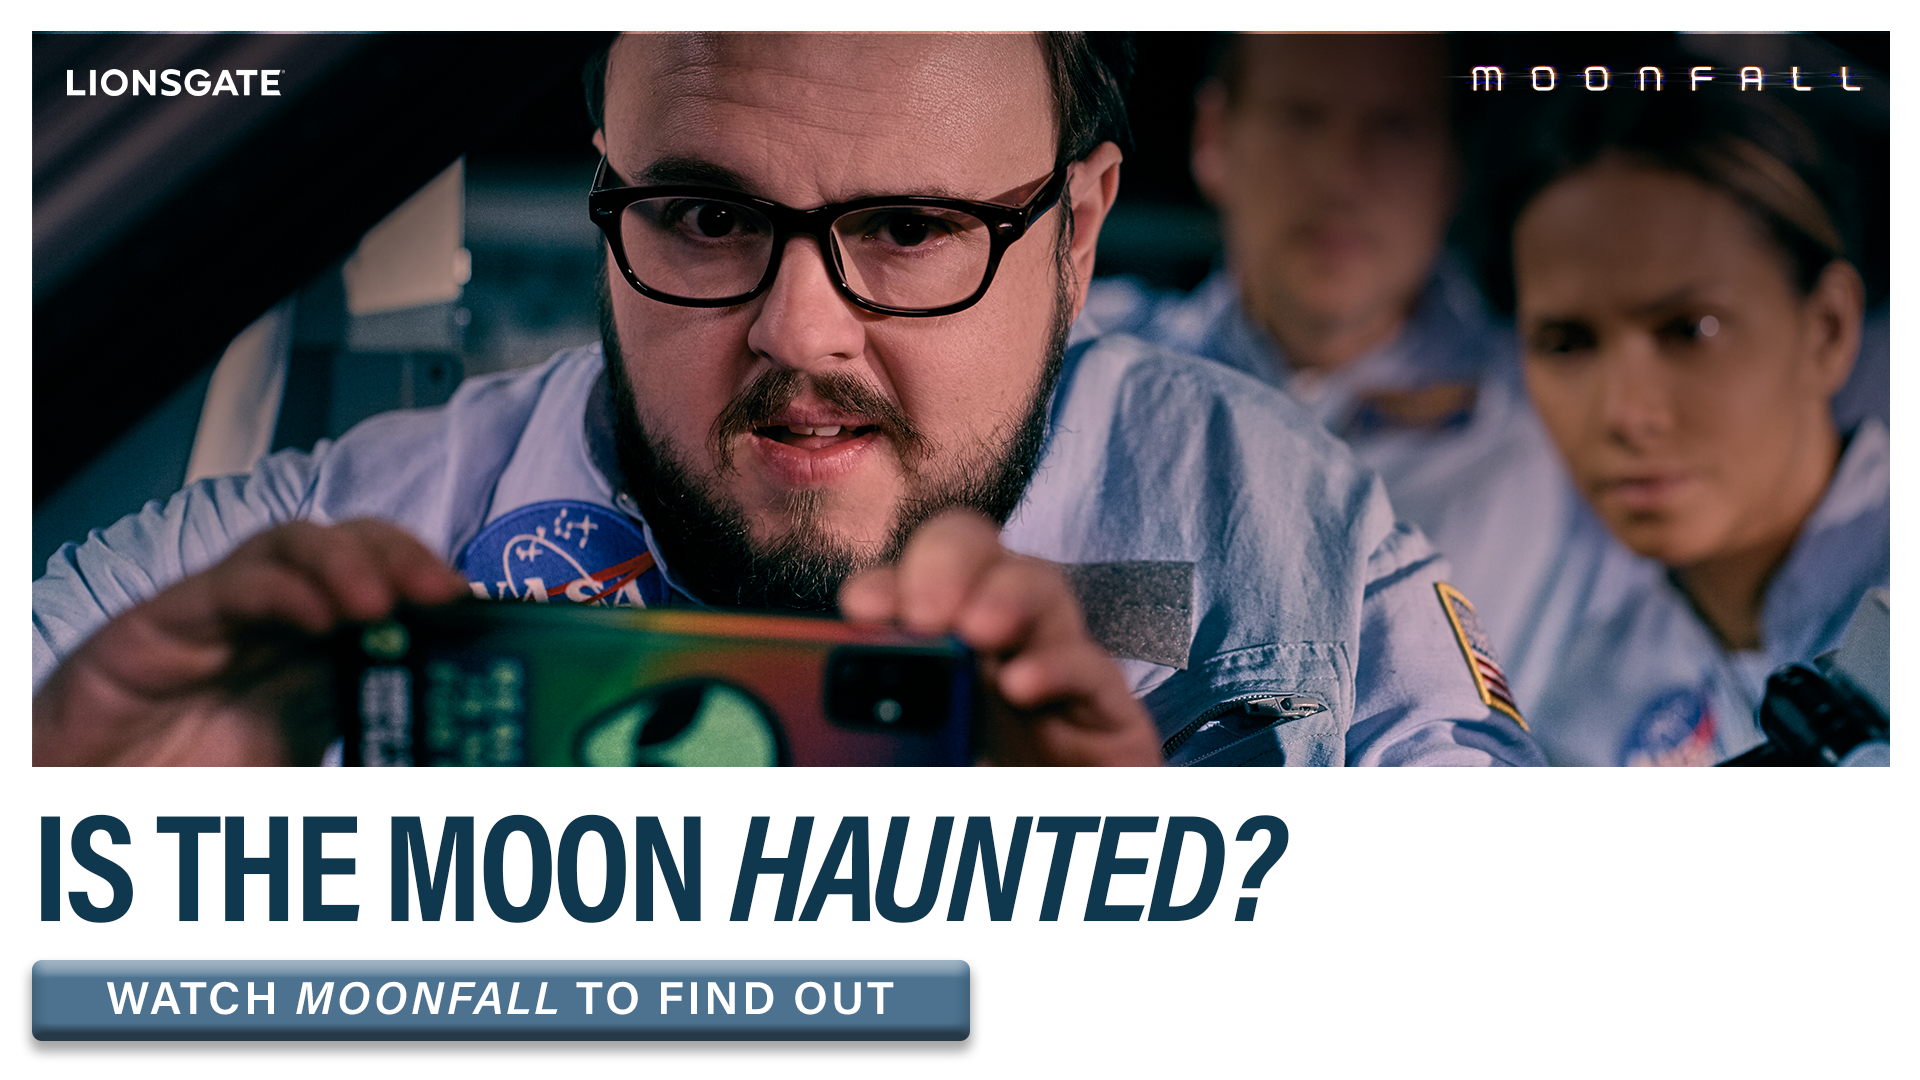 LG_Moonfall_Outbrain_Haunted_16x9.png